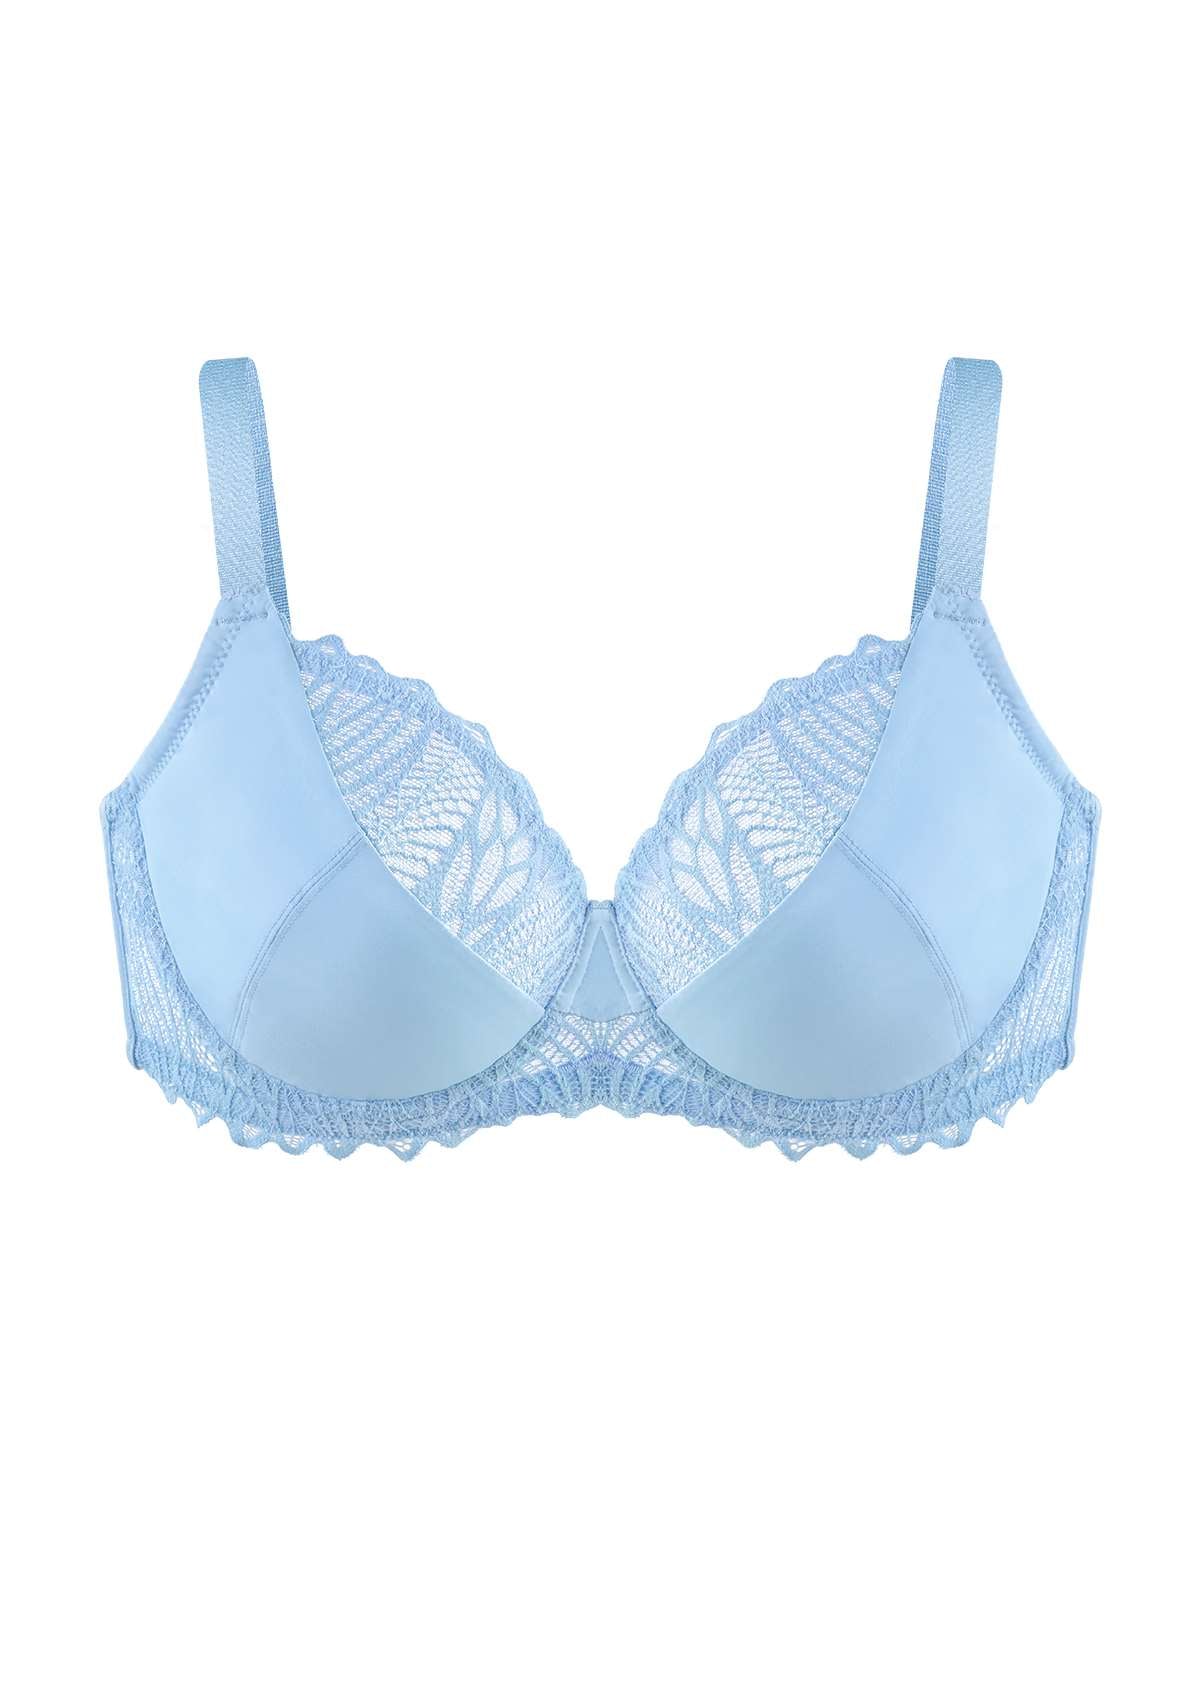 HSIA Pretty Secrets Lace-Trimmed Full Coverage Underwire Bra For Support - Light Pink / 44 / G